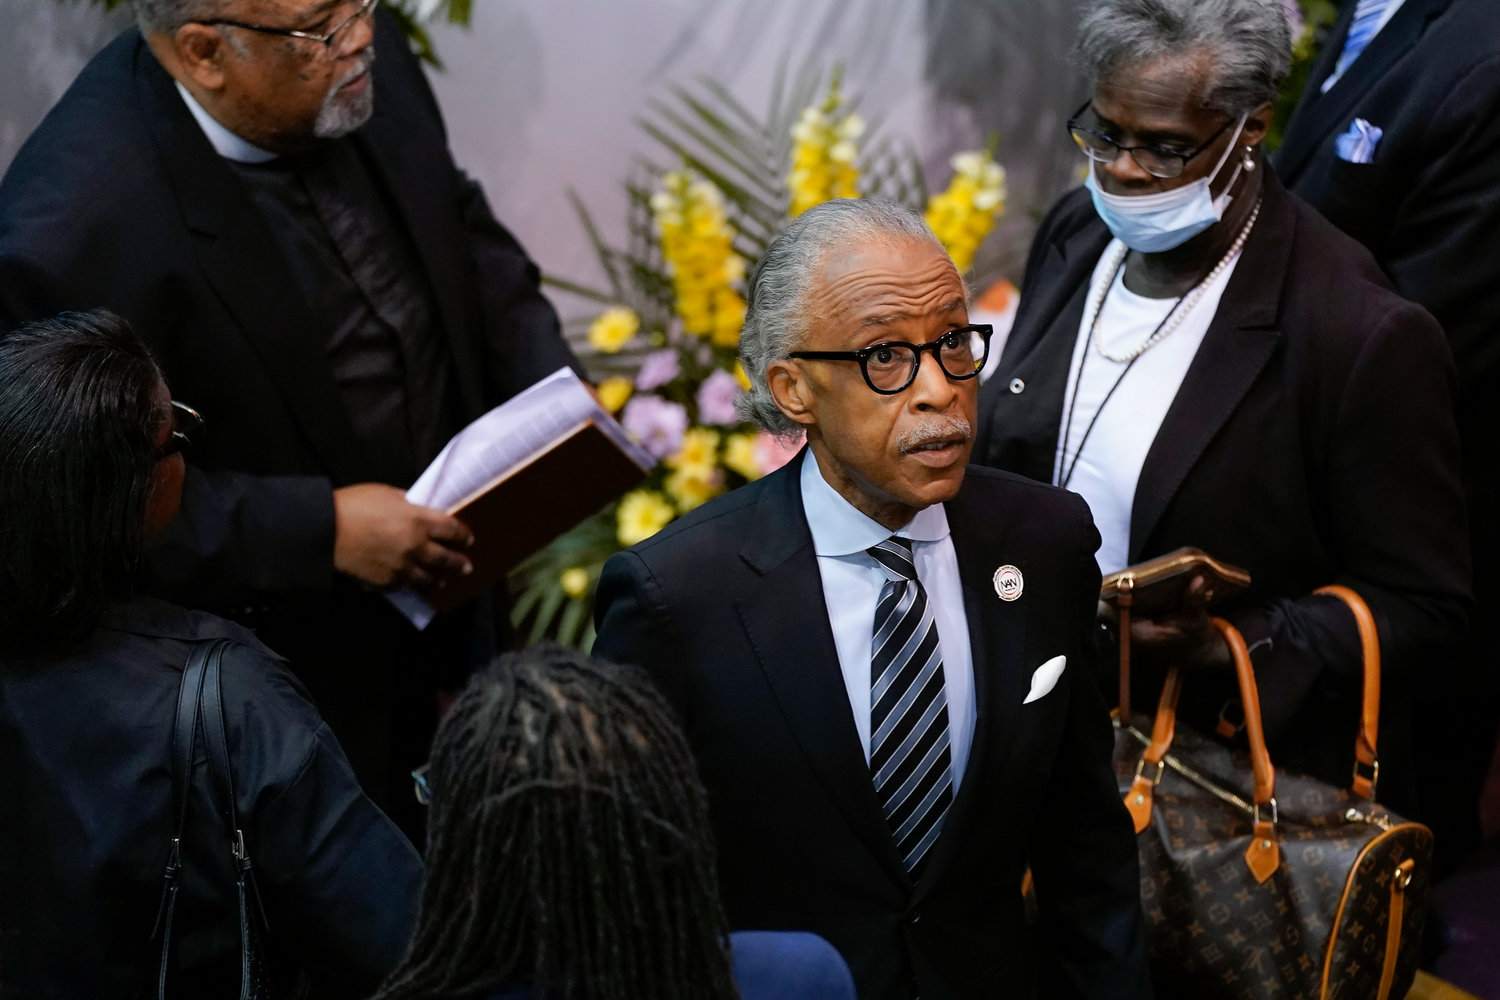 The Rev. Al Sharpton arrives for a memorial service for Ruth Whitfield, a victim of the Buffalo supermarket shooting, at Mt. Olive Baptist Church with Vice President Kamala Harris in attendance, Saturday, May 28, 2022, in Buffalo, N.Y.